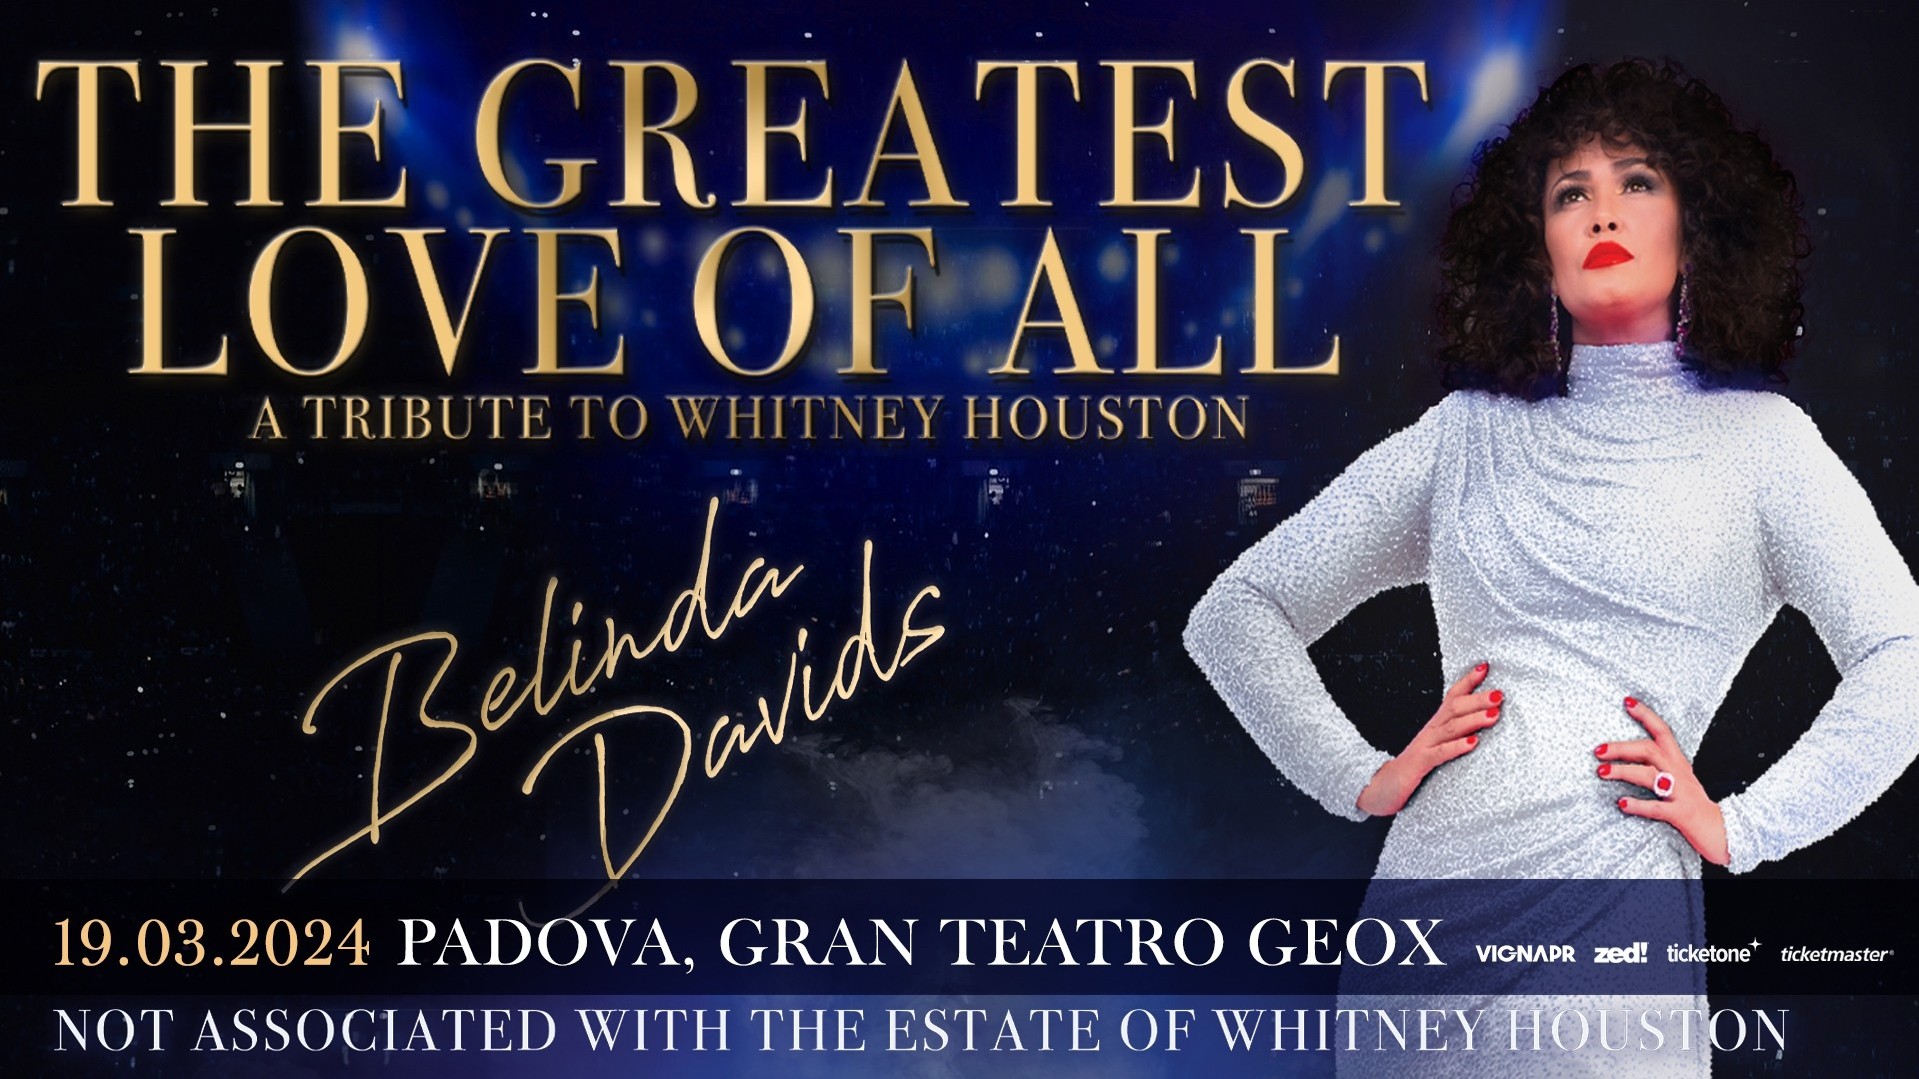 The Greatest Love Of All - A Tribute to Whitney Houston (starring Belinda Davids)